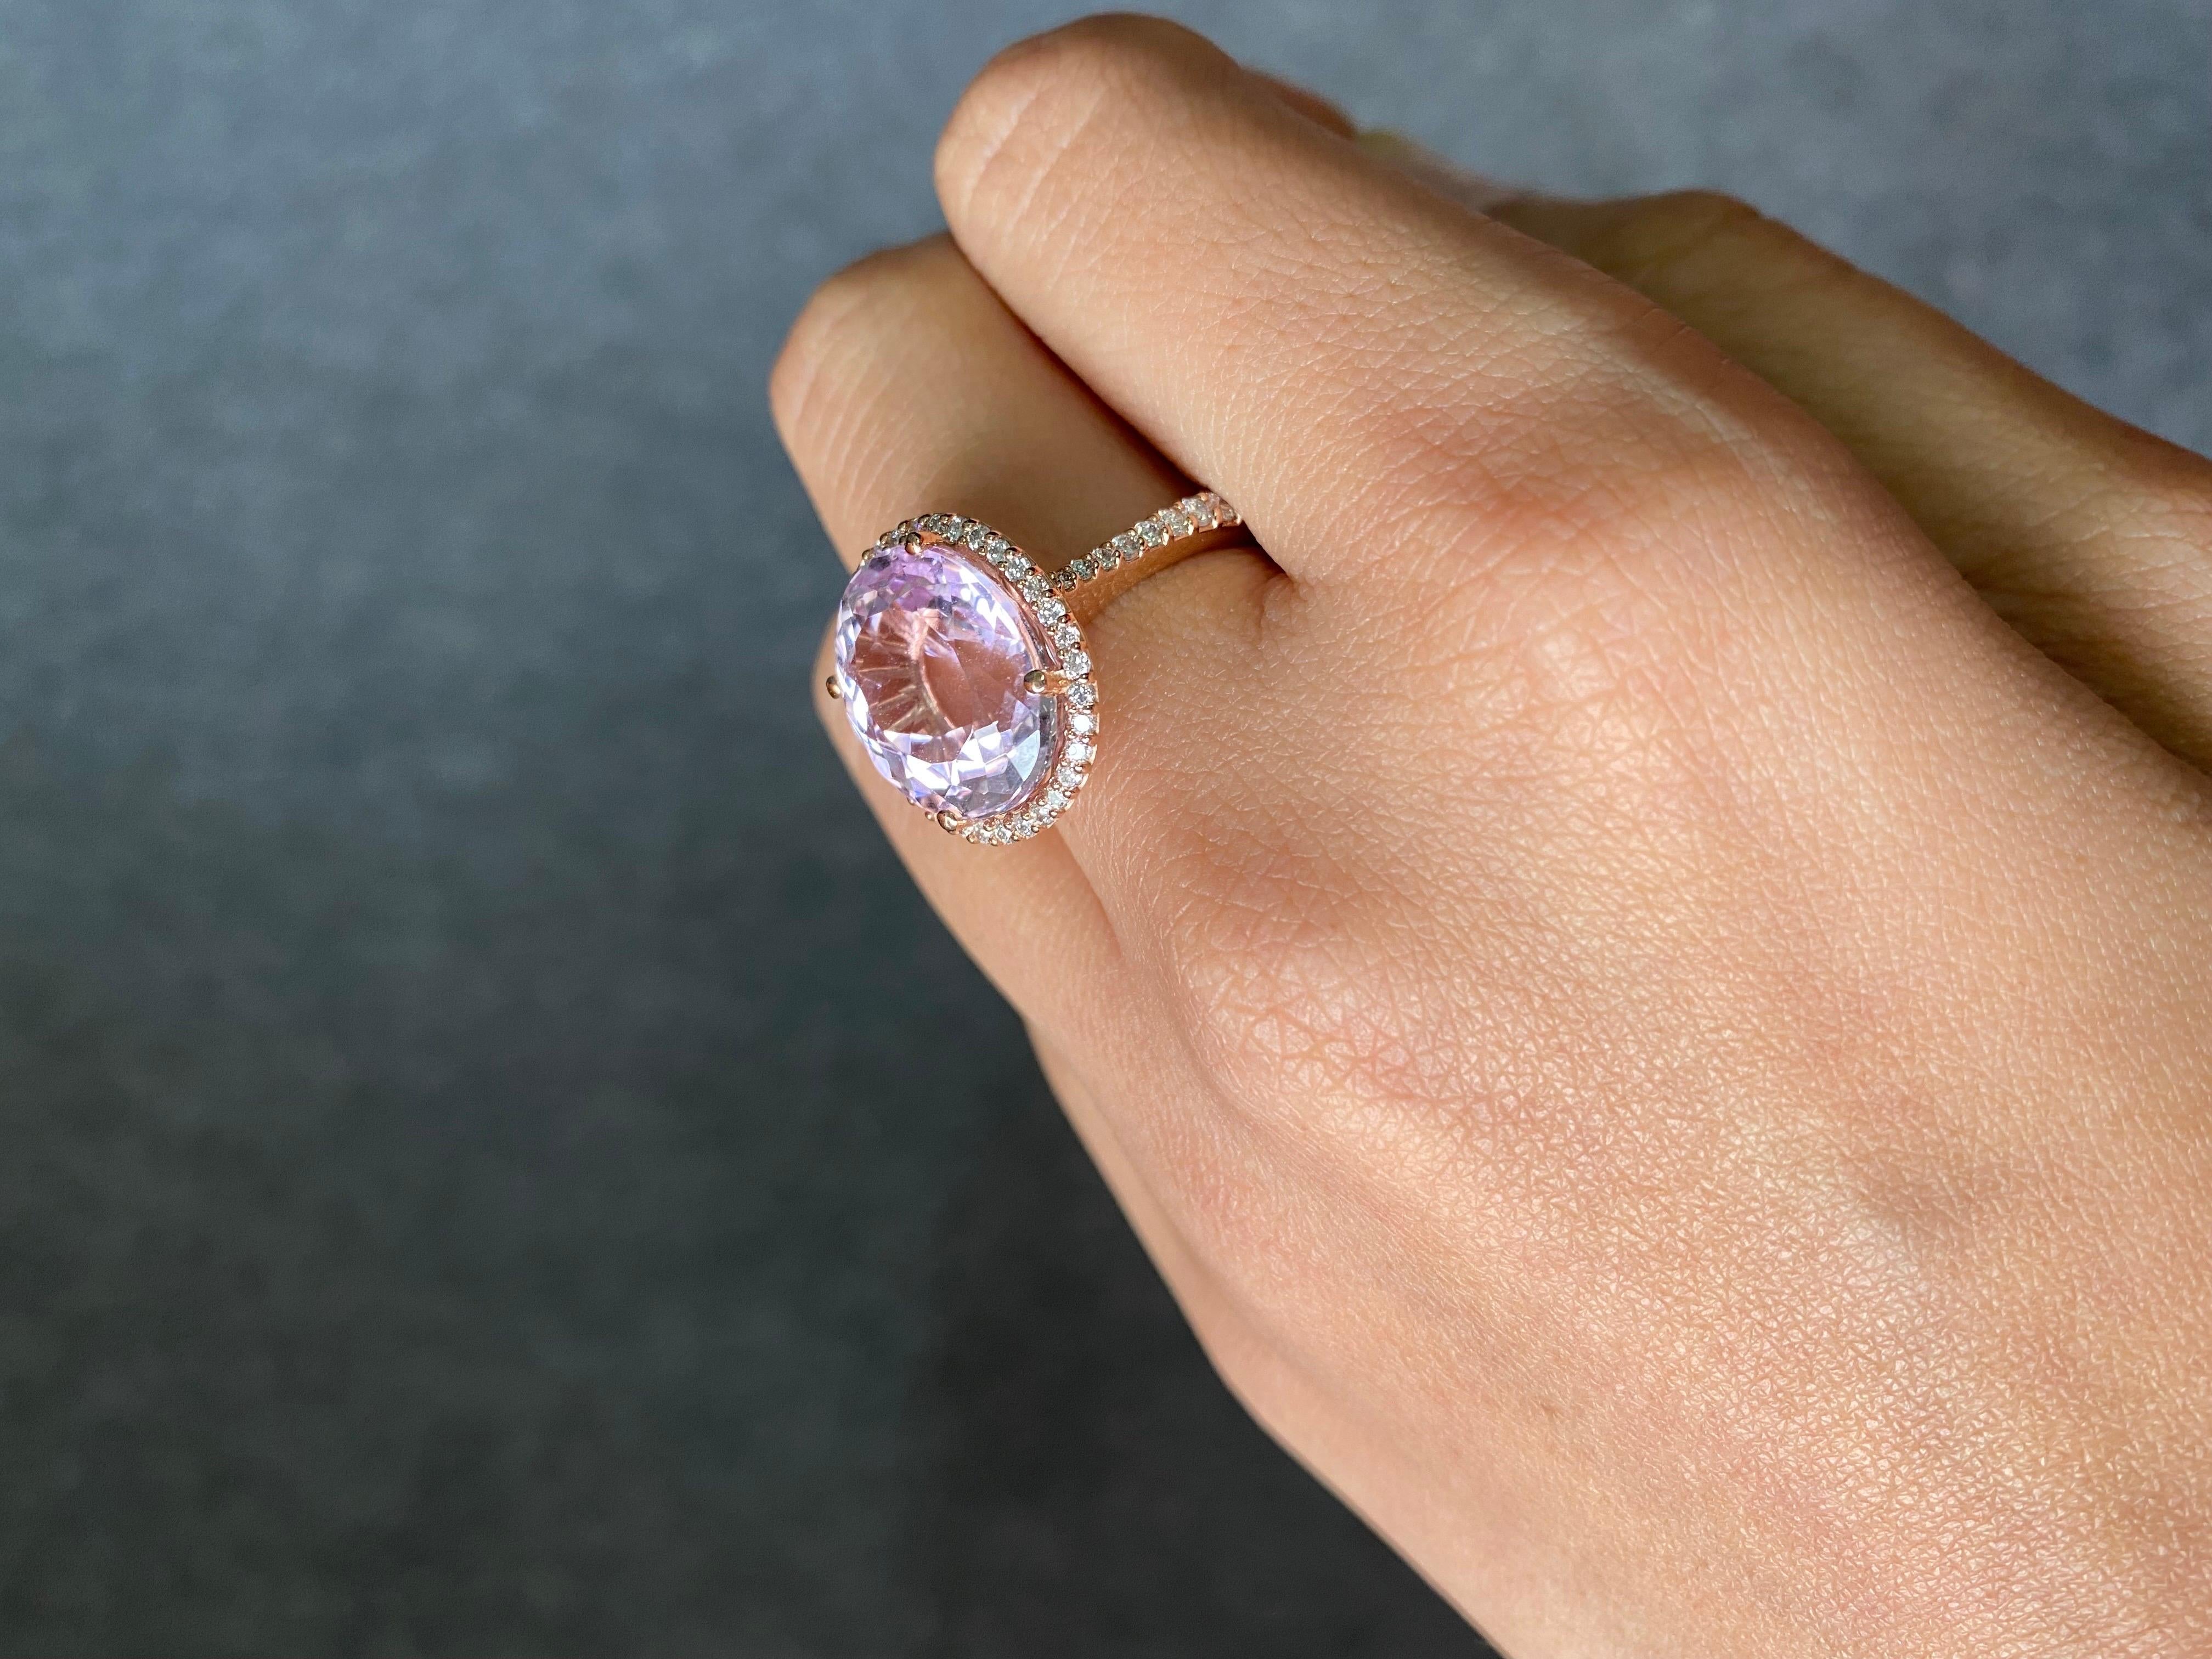 Oval 10.48 Kunzite & Diamond Large Statement Halo Cluster Ring in 18k Pink/Rose Gold

Make a glamorous entrance with this custom made 18k rose/pink gold vintage-influenced ring, artistically crafted in a brightly polished shine. A large cotton candy